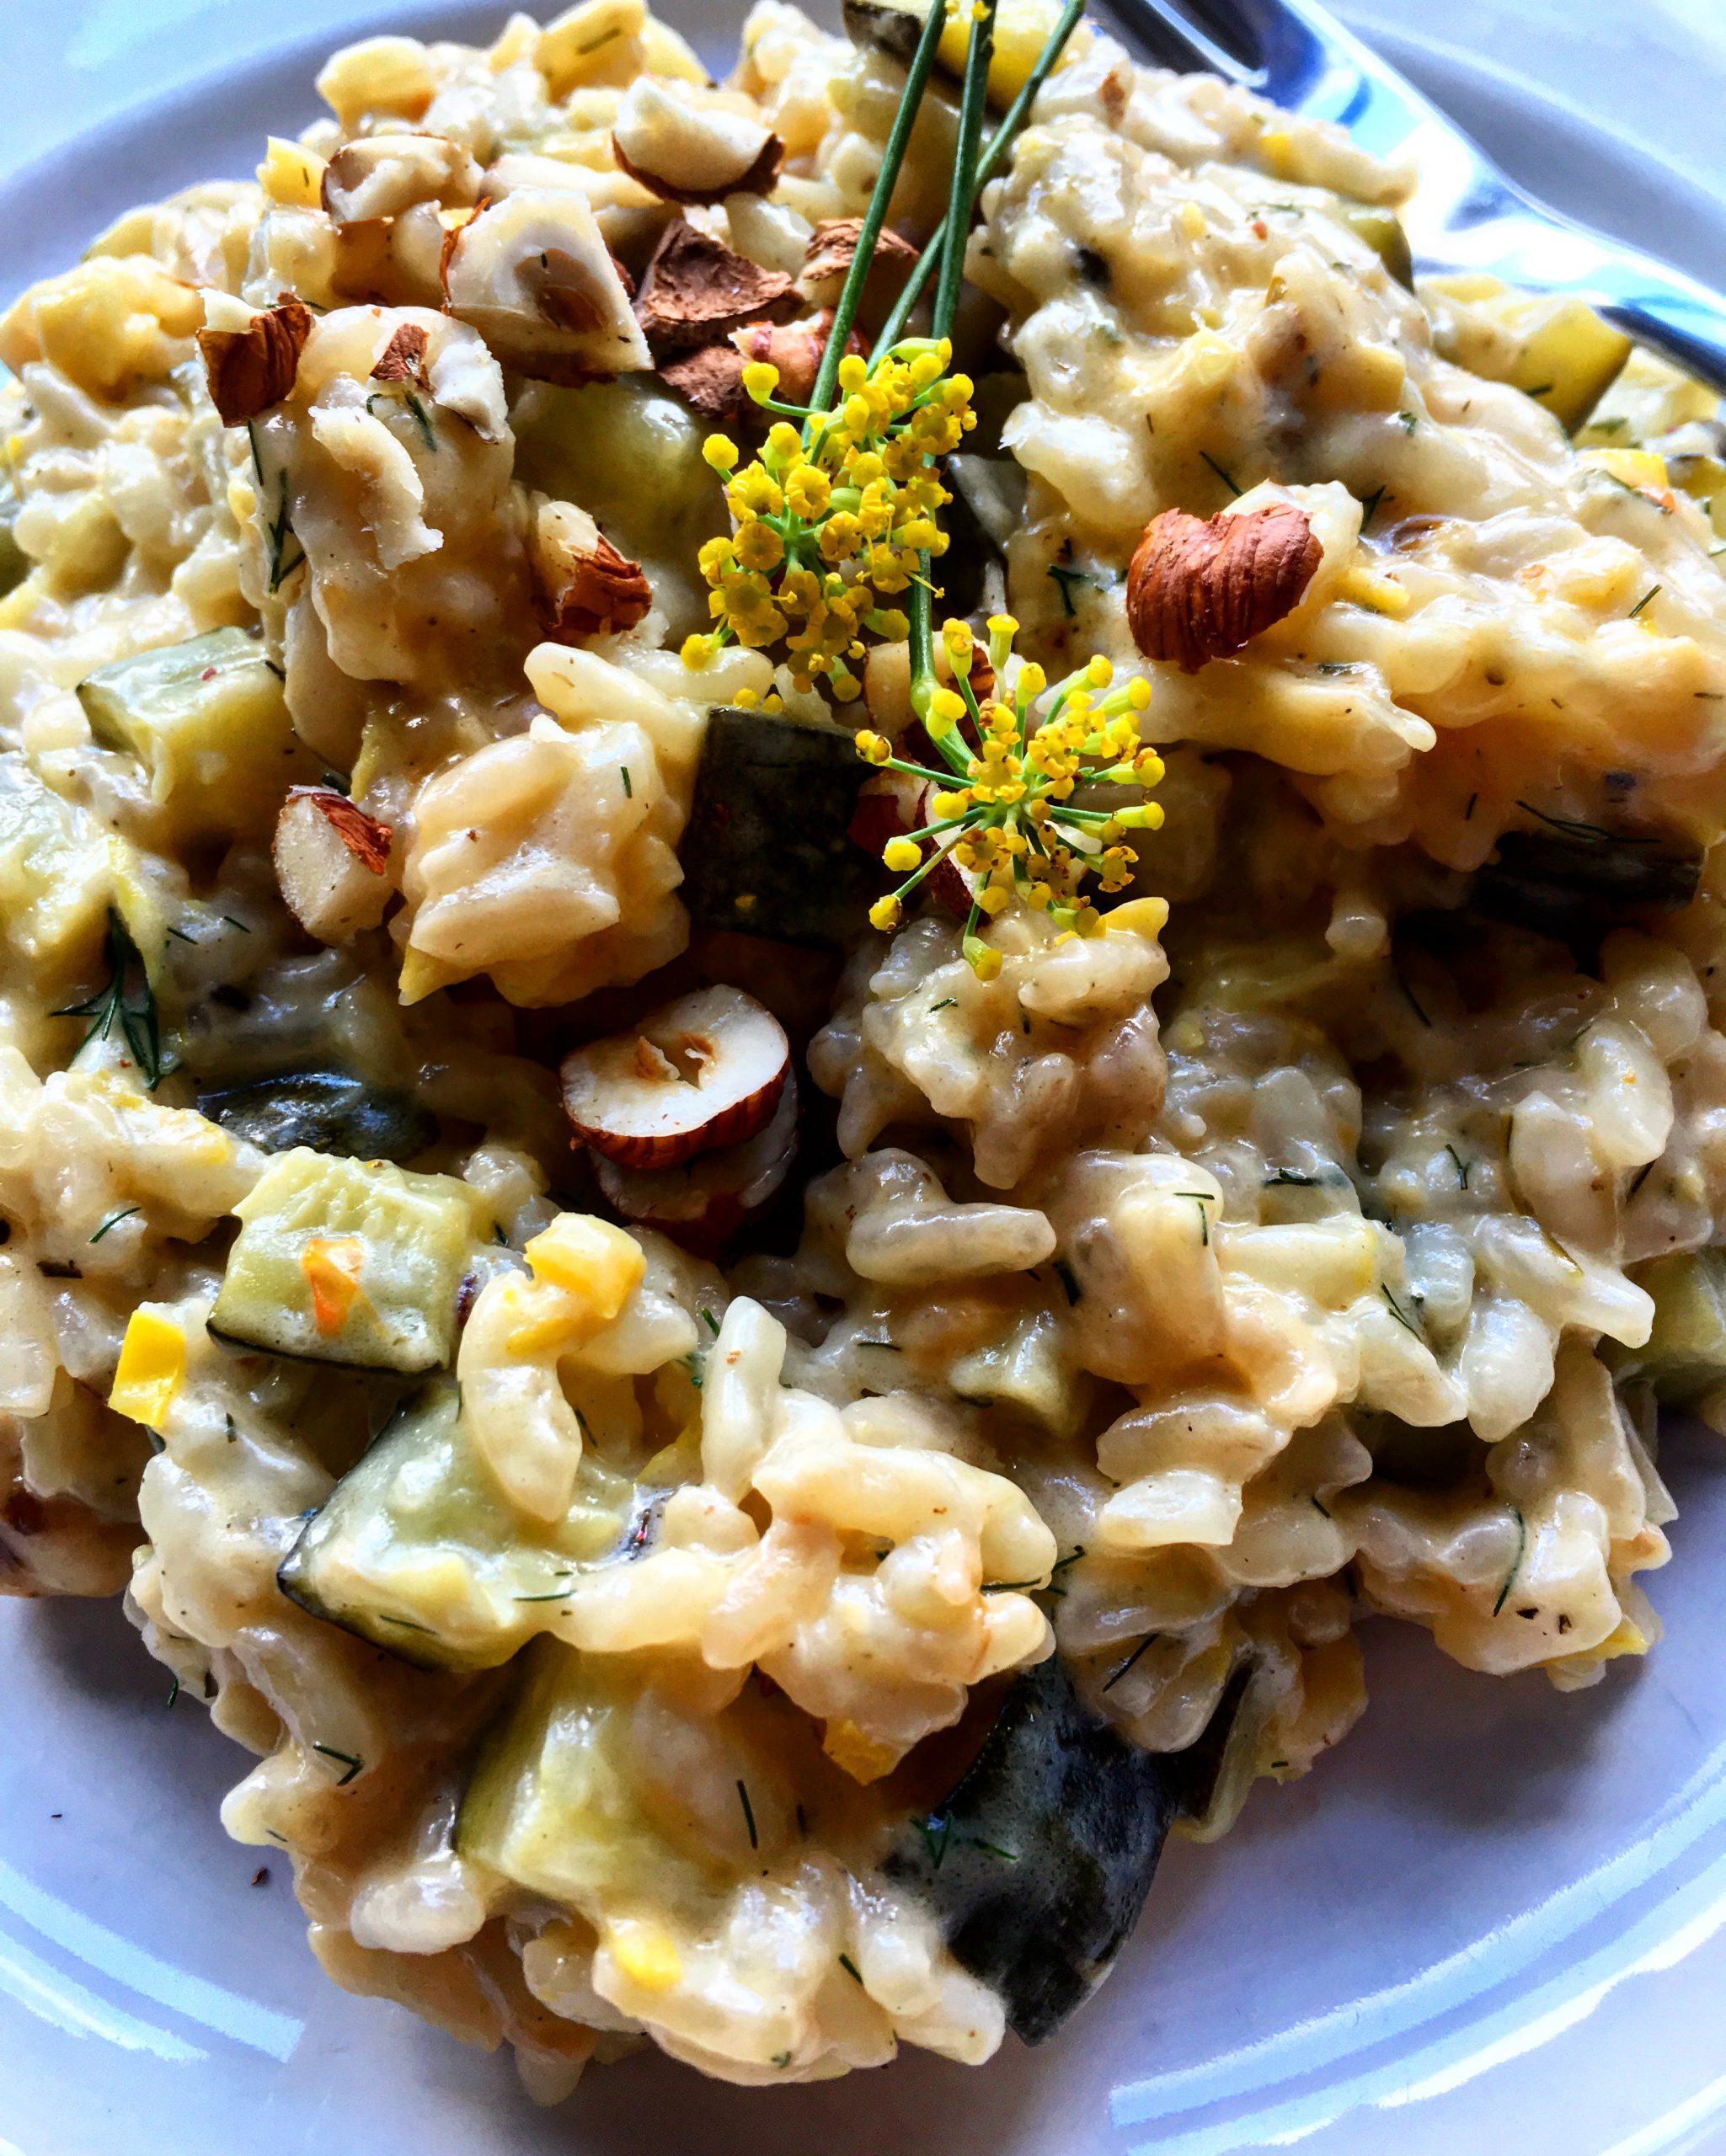 Lemon, Courgette and Hazelnut Risotto